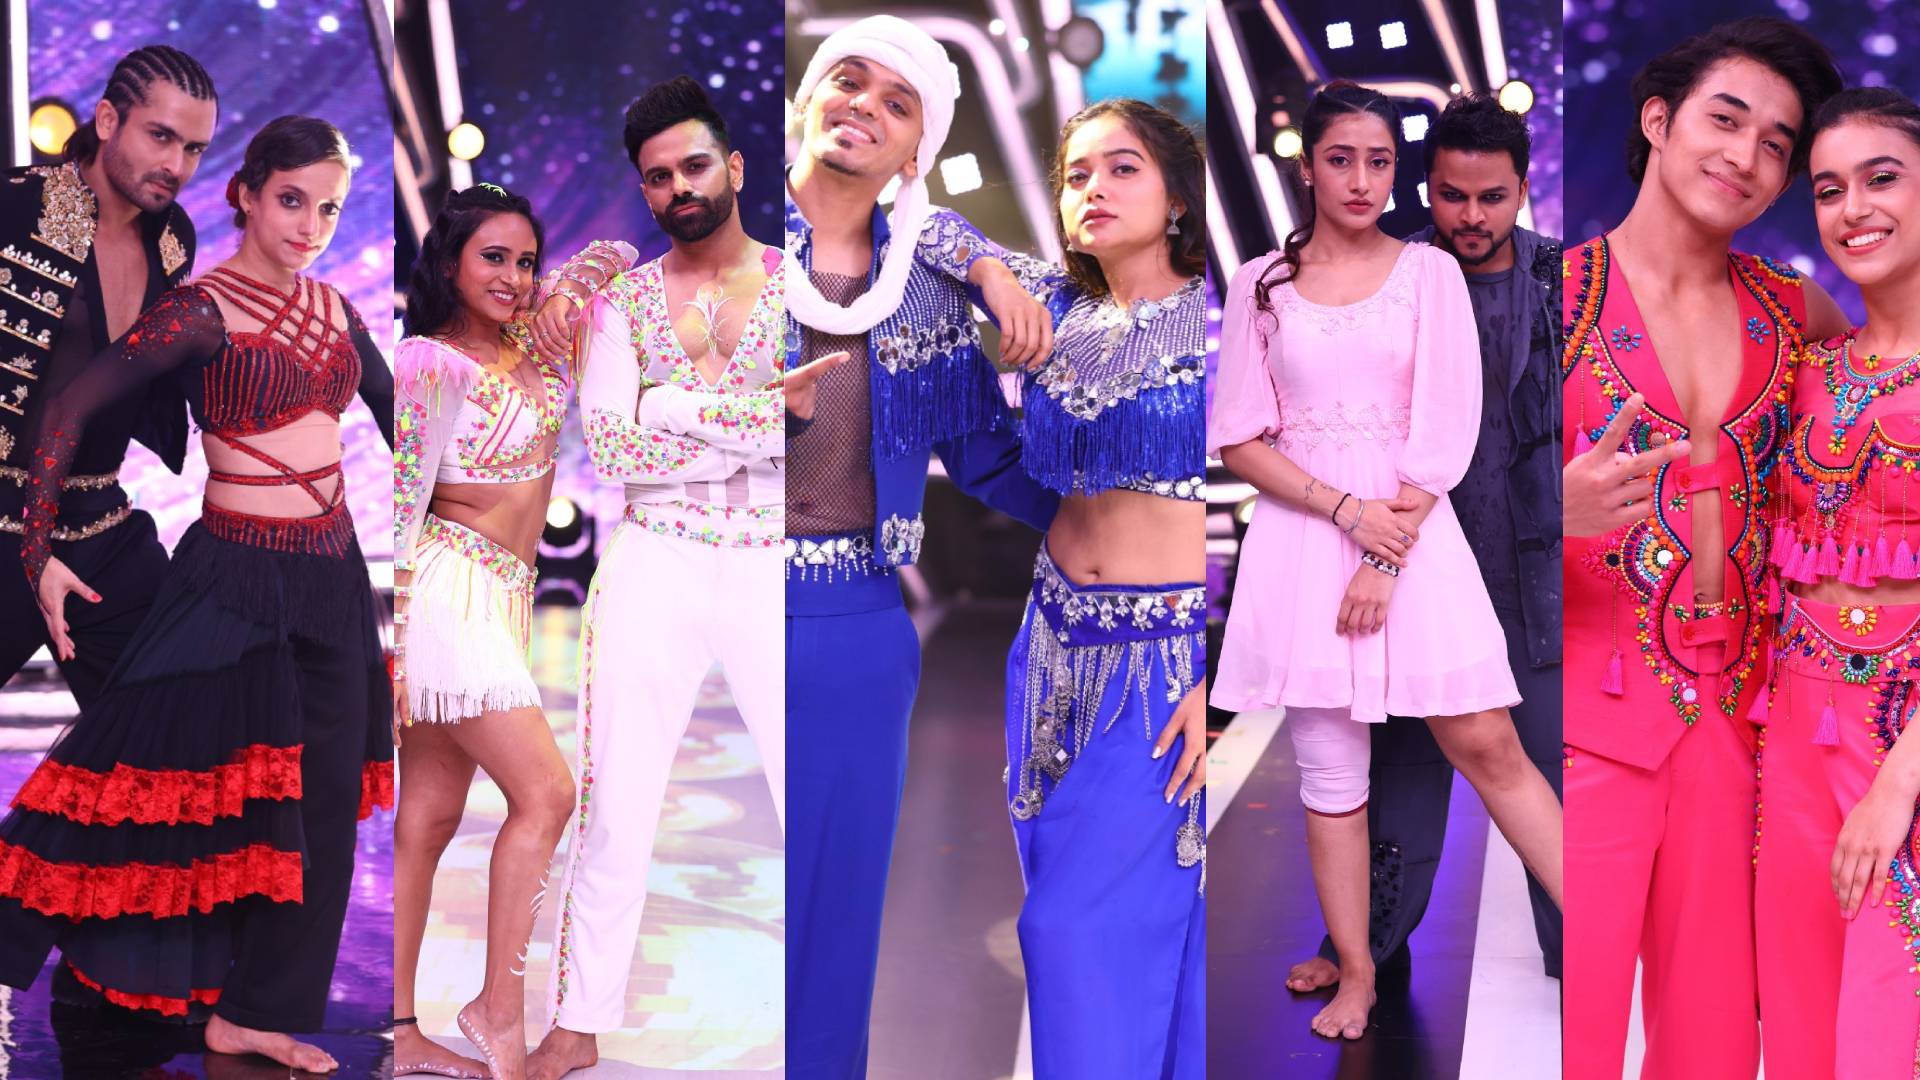 The fight for the ultimate champion of the season begins as Sony Entertainment Television’s celebrity dance reality show ‘Jhalak Dikhhla Jaa’ unveils its top 5 finalists